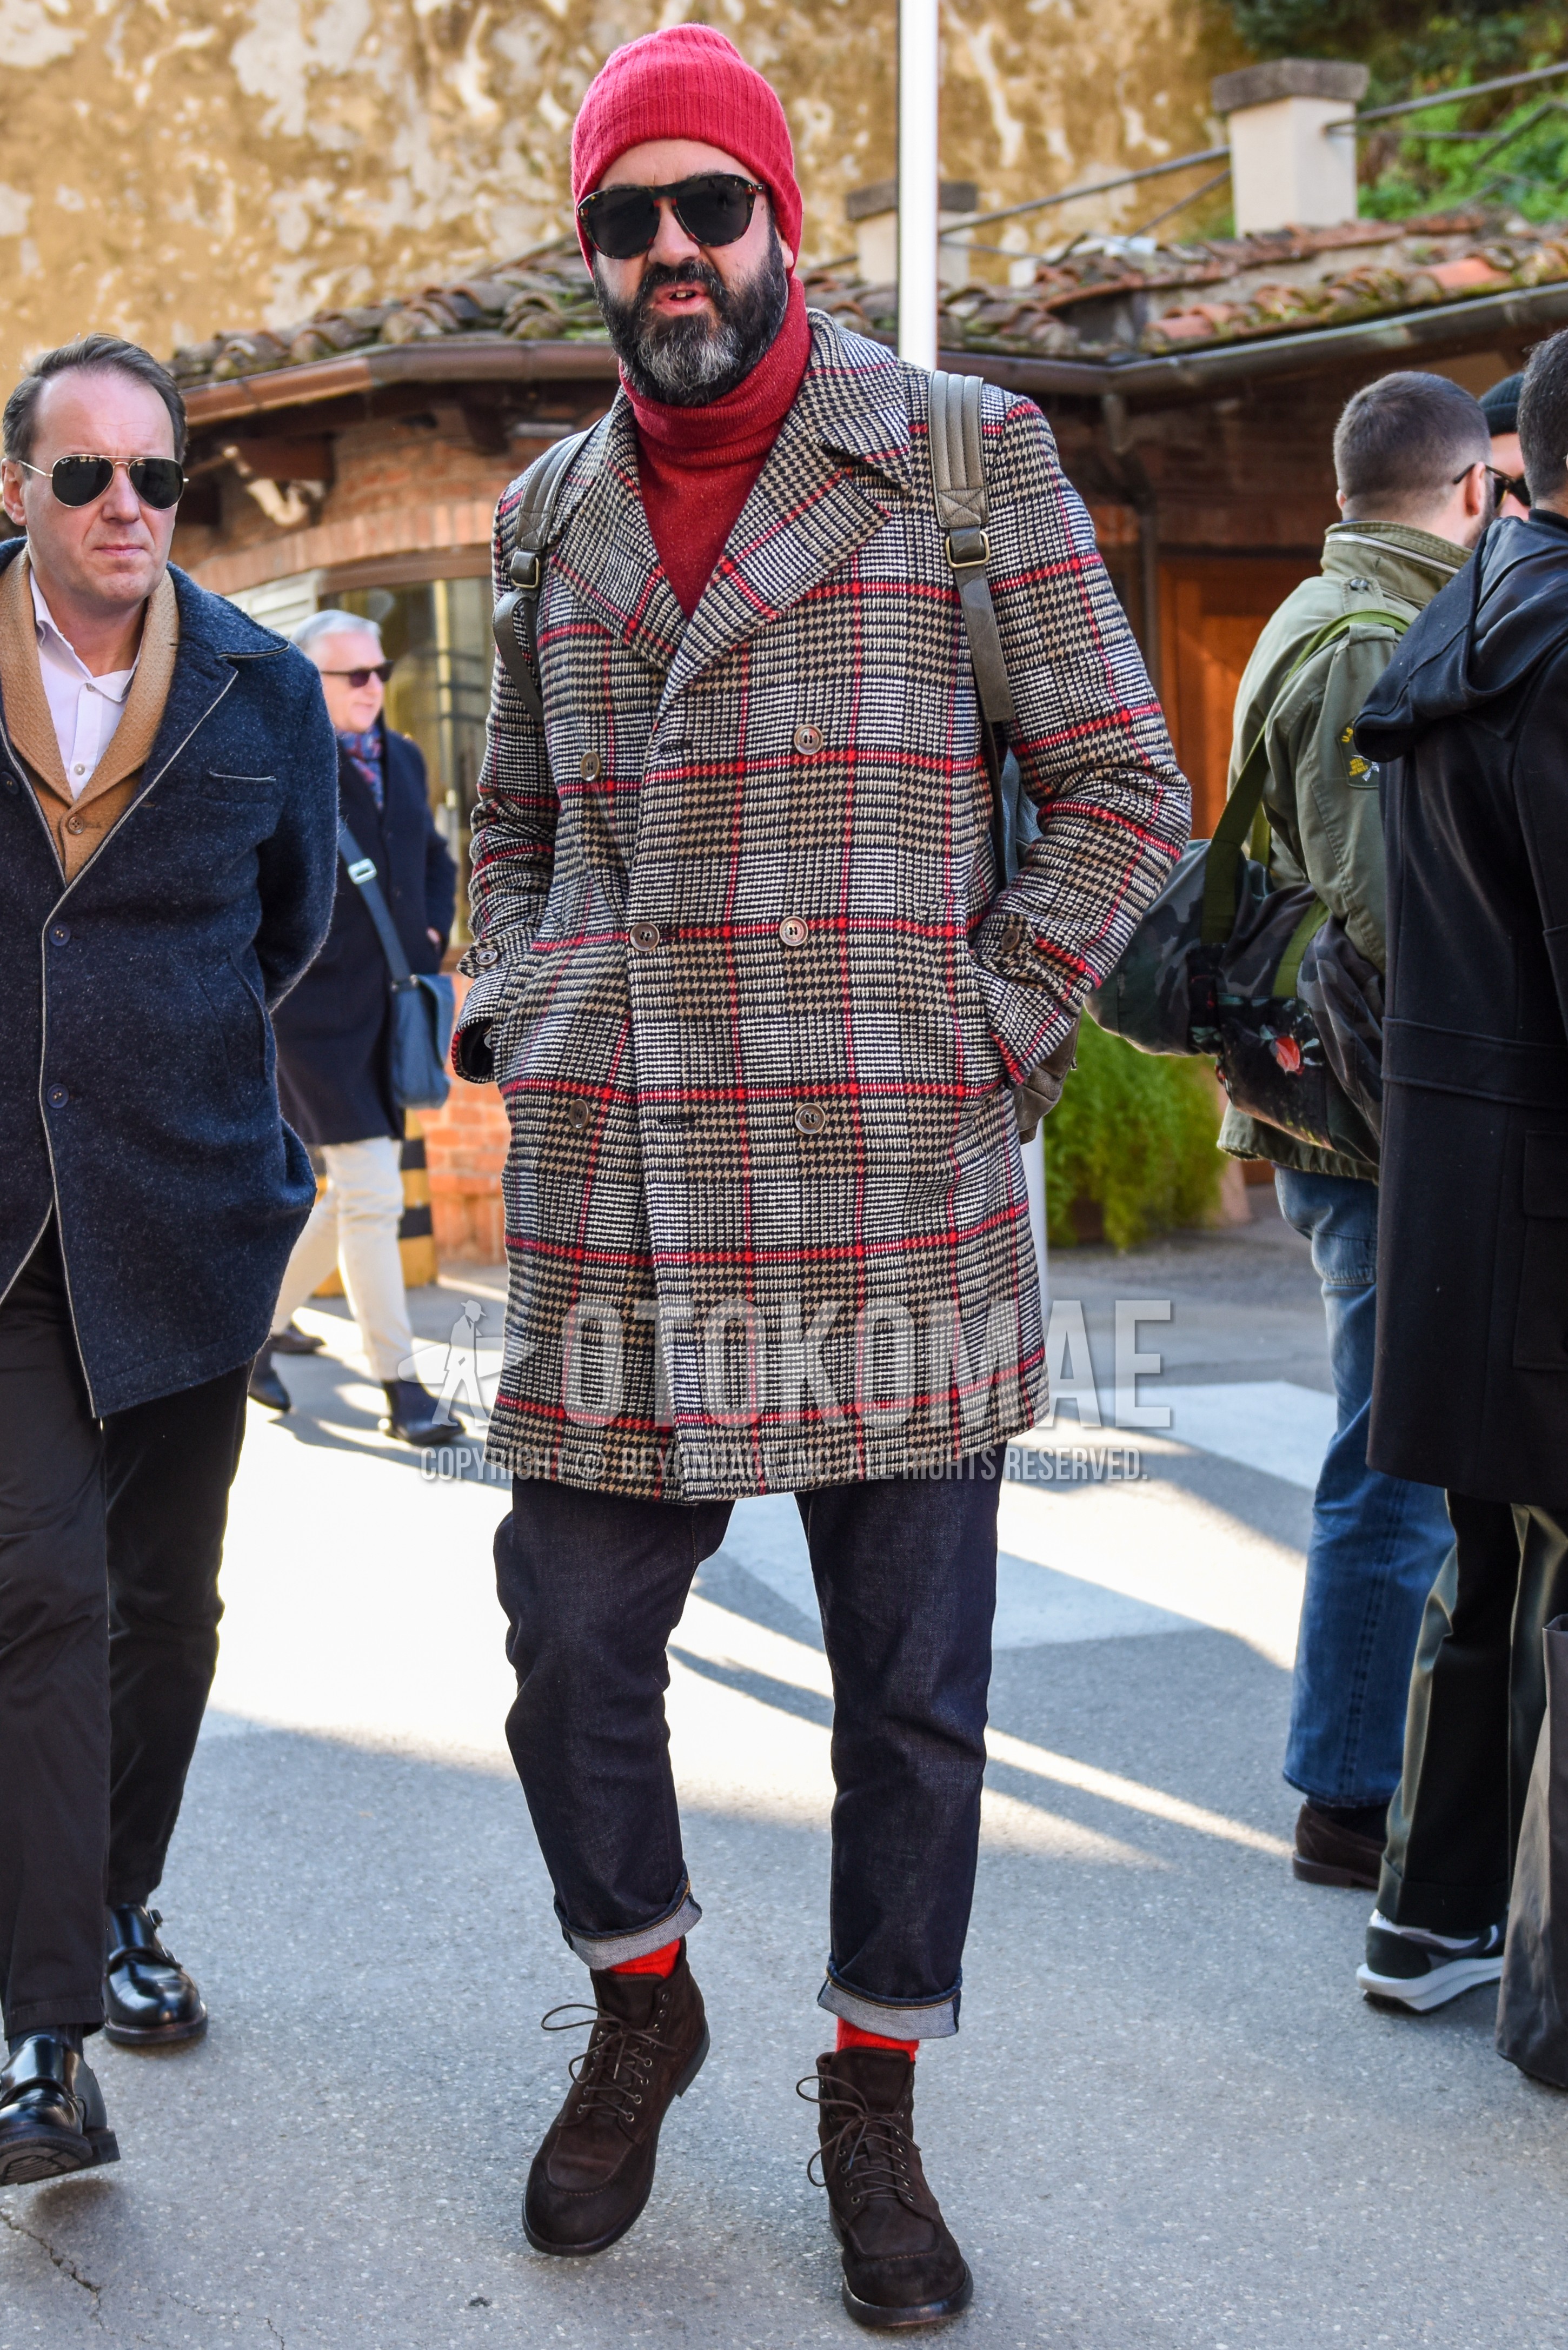 Men's autumn winter outfit with red plain knit cap, brown tortoiseshell sunglasses, gray red check ulster coat, red plain turtleneck knit, navy plain denim/jeans, red plain socks, brown  boots.